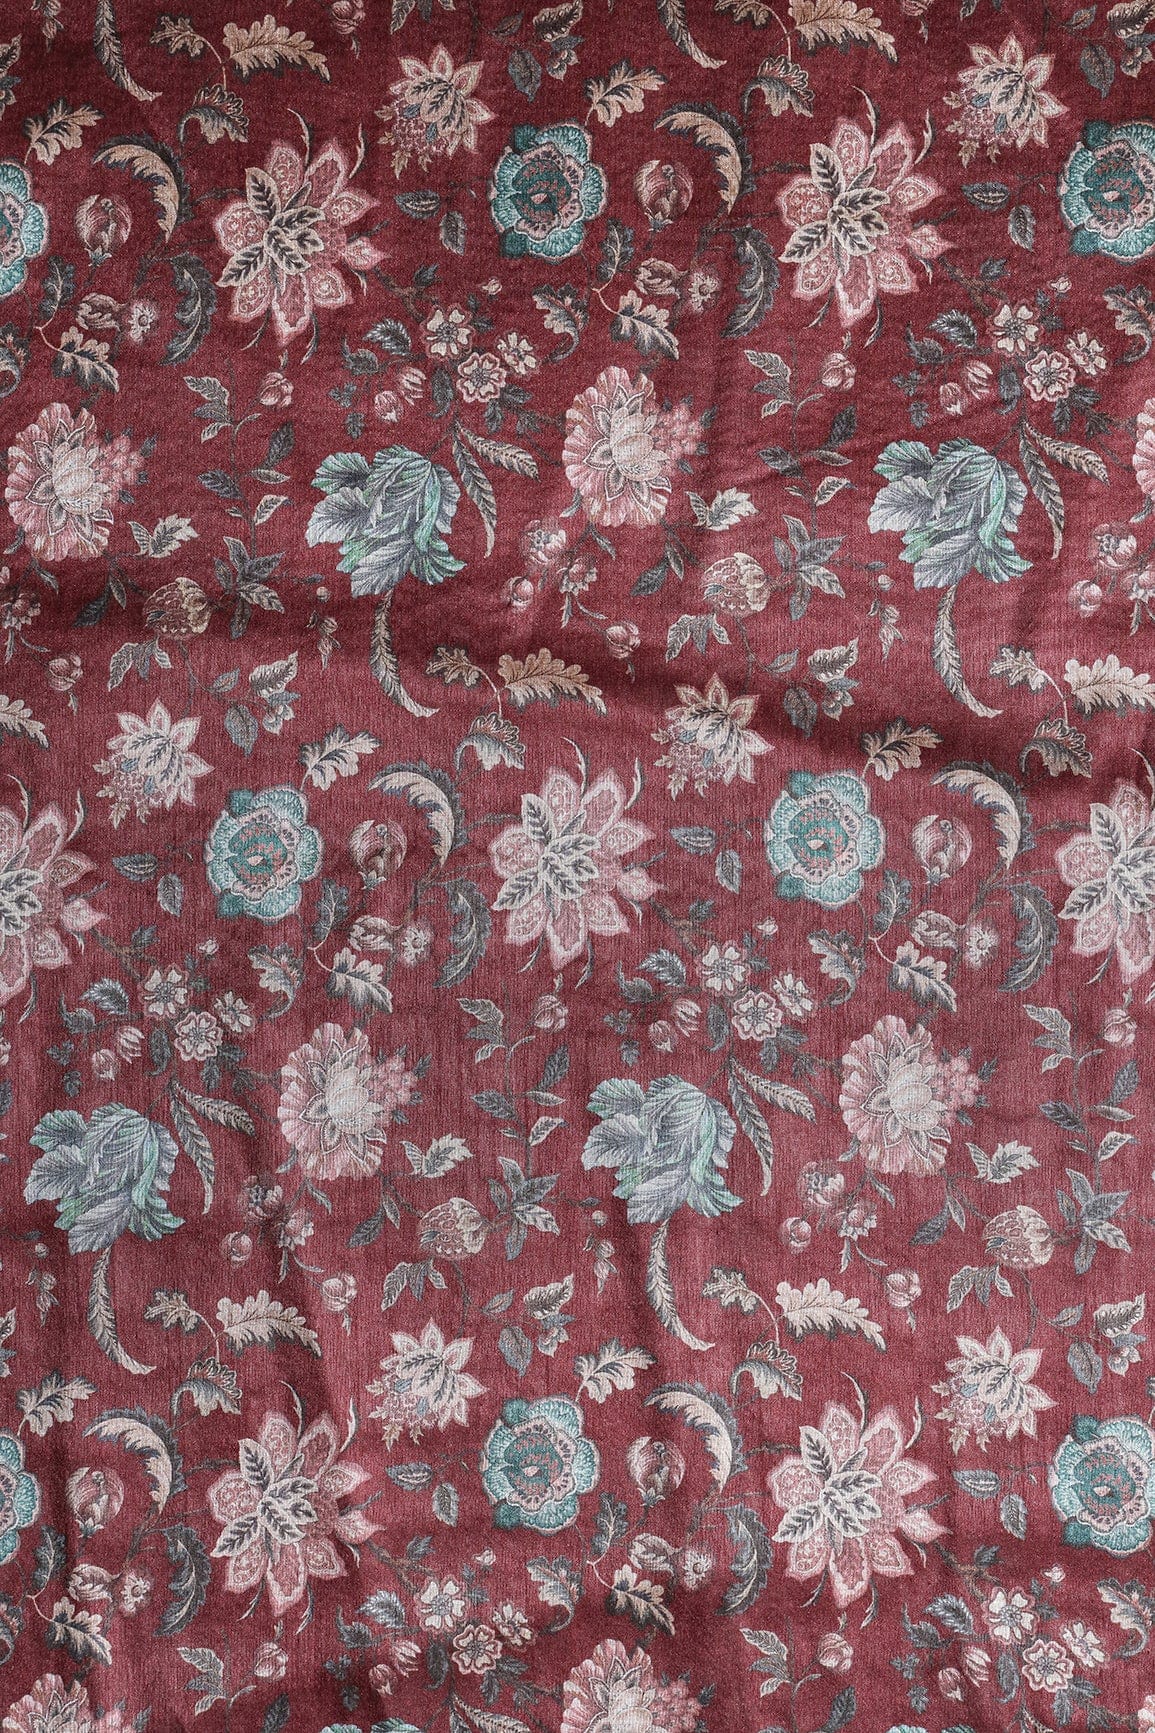 doeraa Prints Pink And Grey Floral Pattern Digital Print On Mulberry Silk Fabric